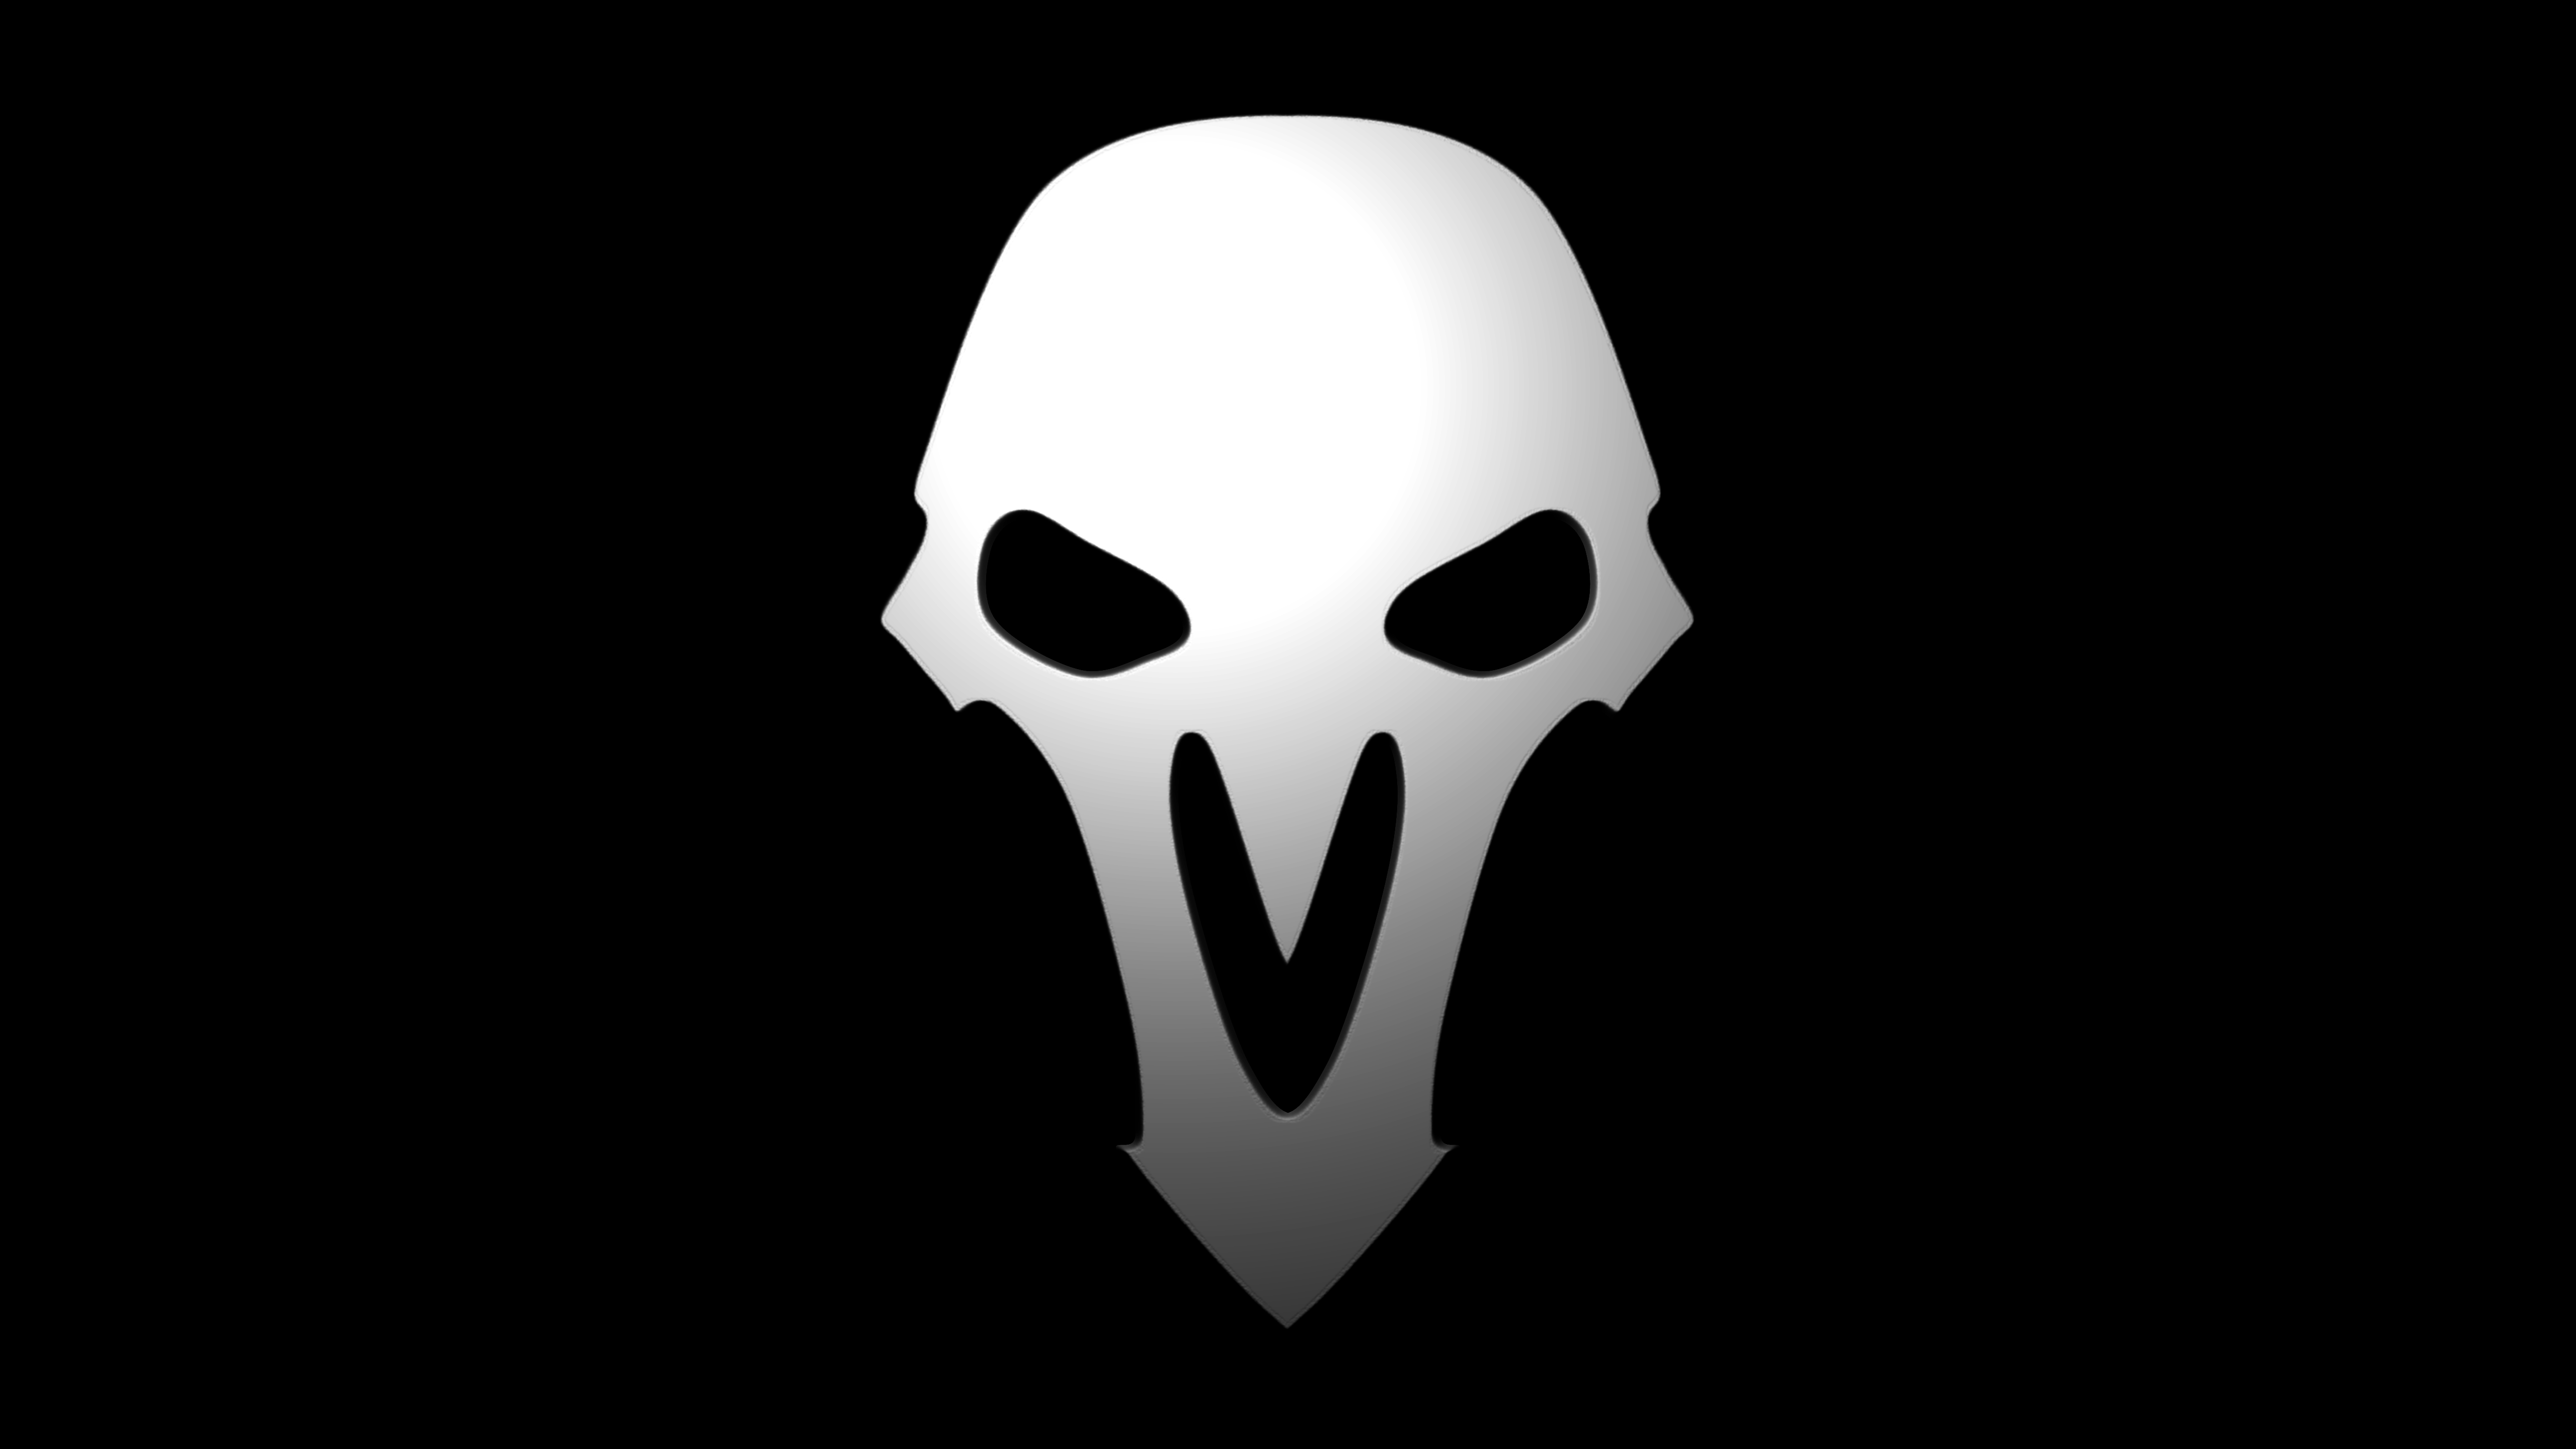 Image For The Reaper - Reaper Mask Background Overwatch - HD Wallpaper 